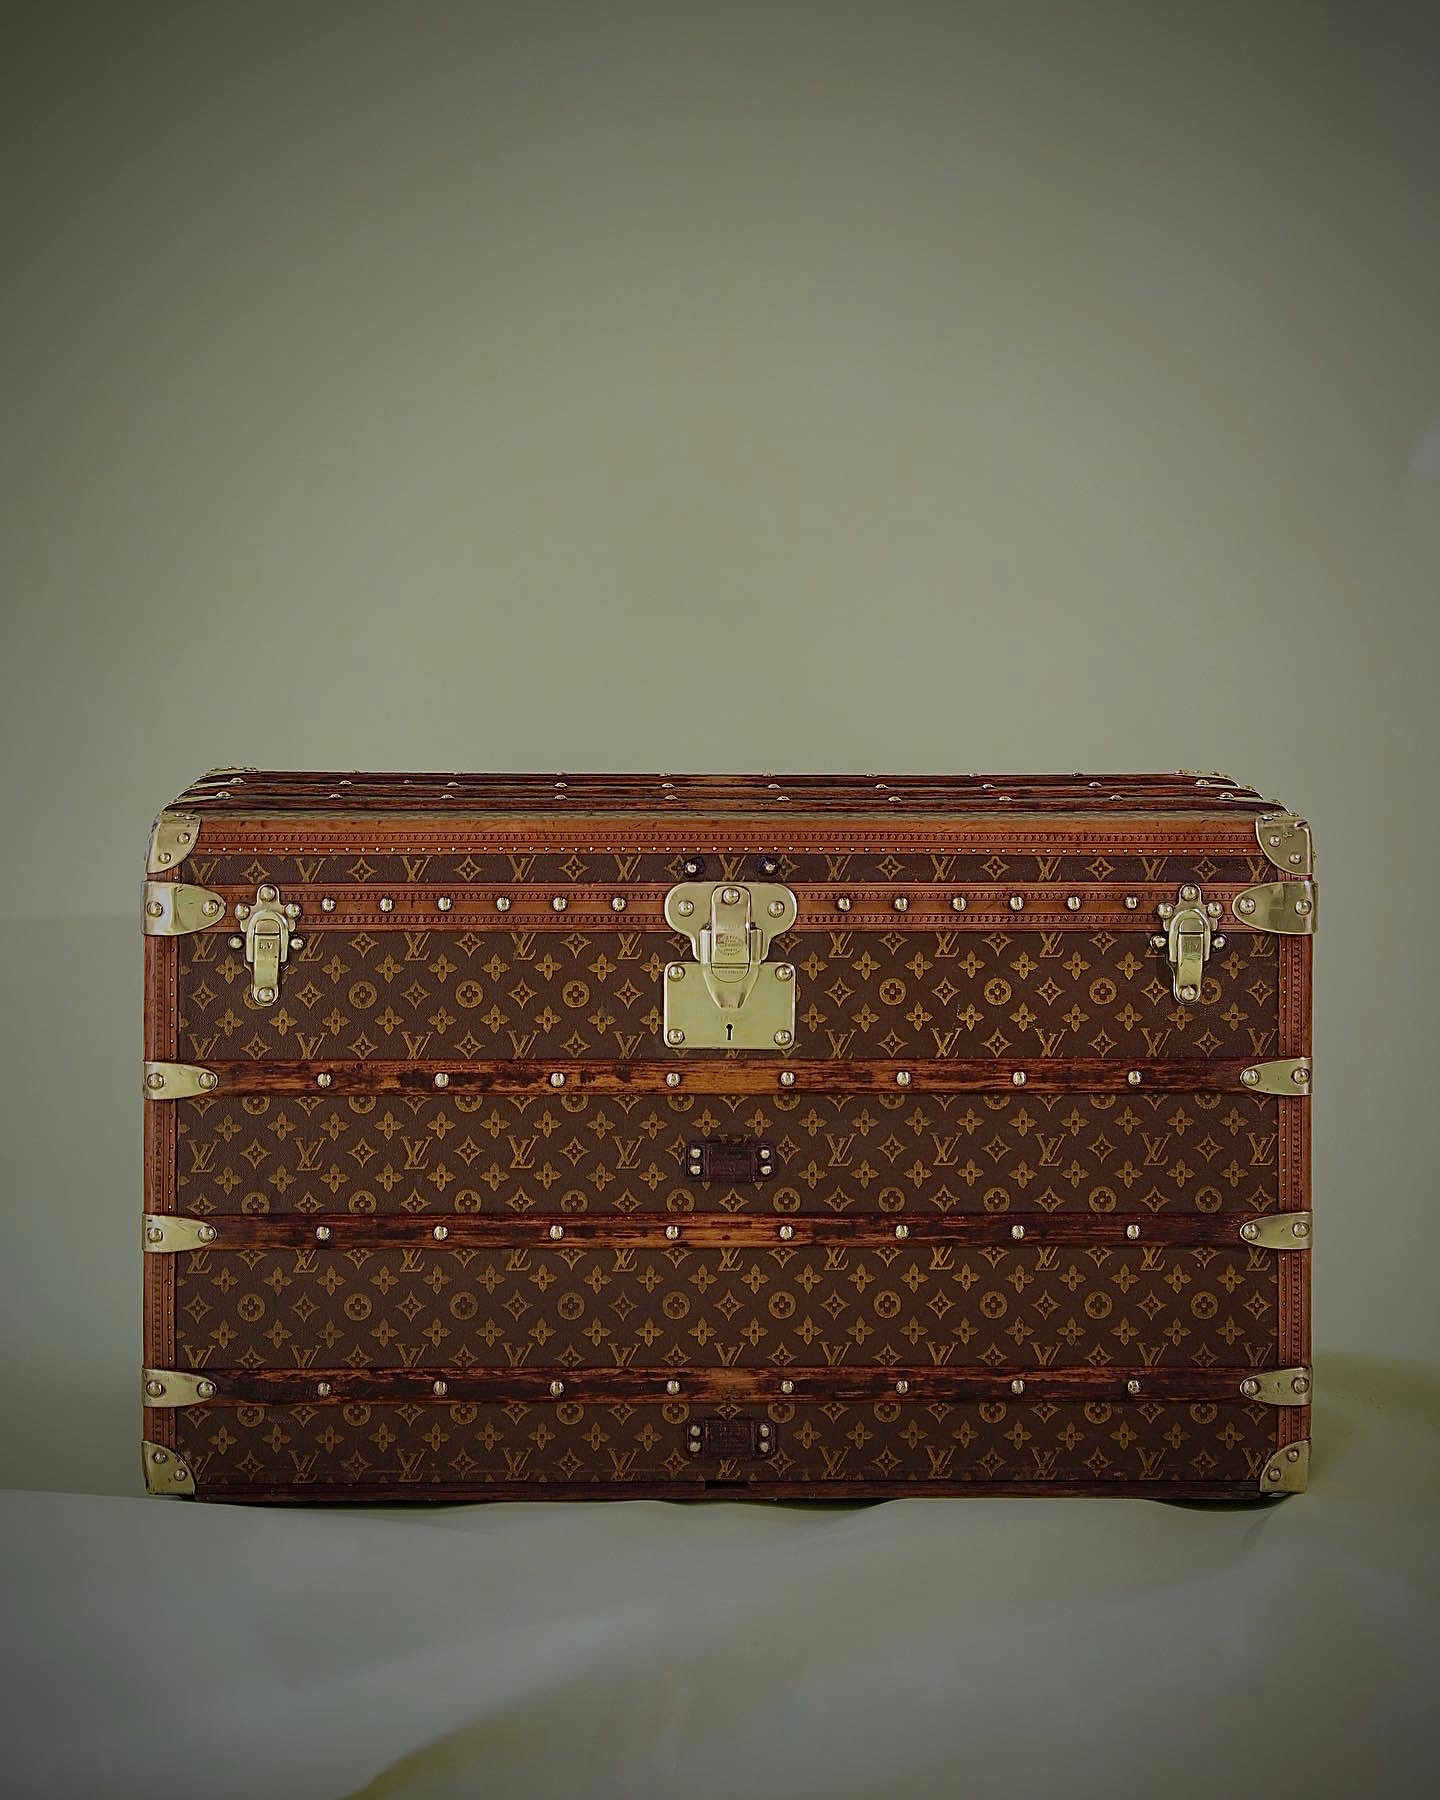 the-well-traveled-trunk-louis-vuitton-thumbnail-product-5753-1